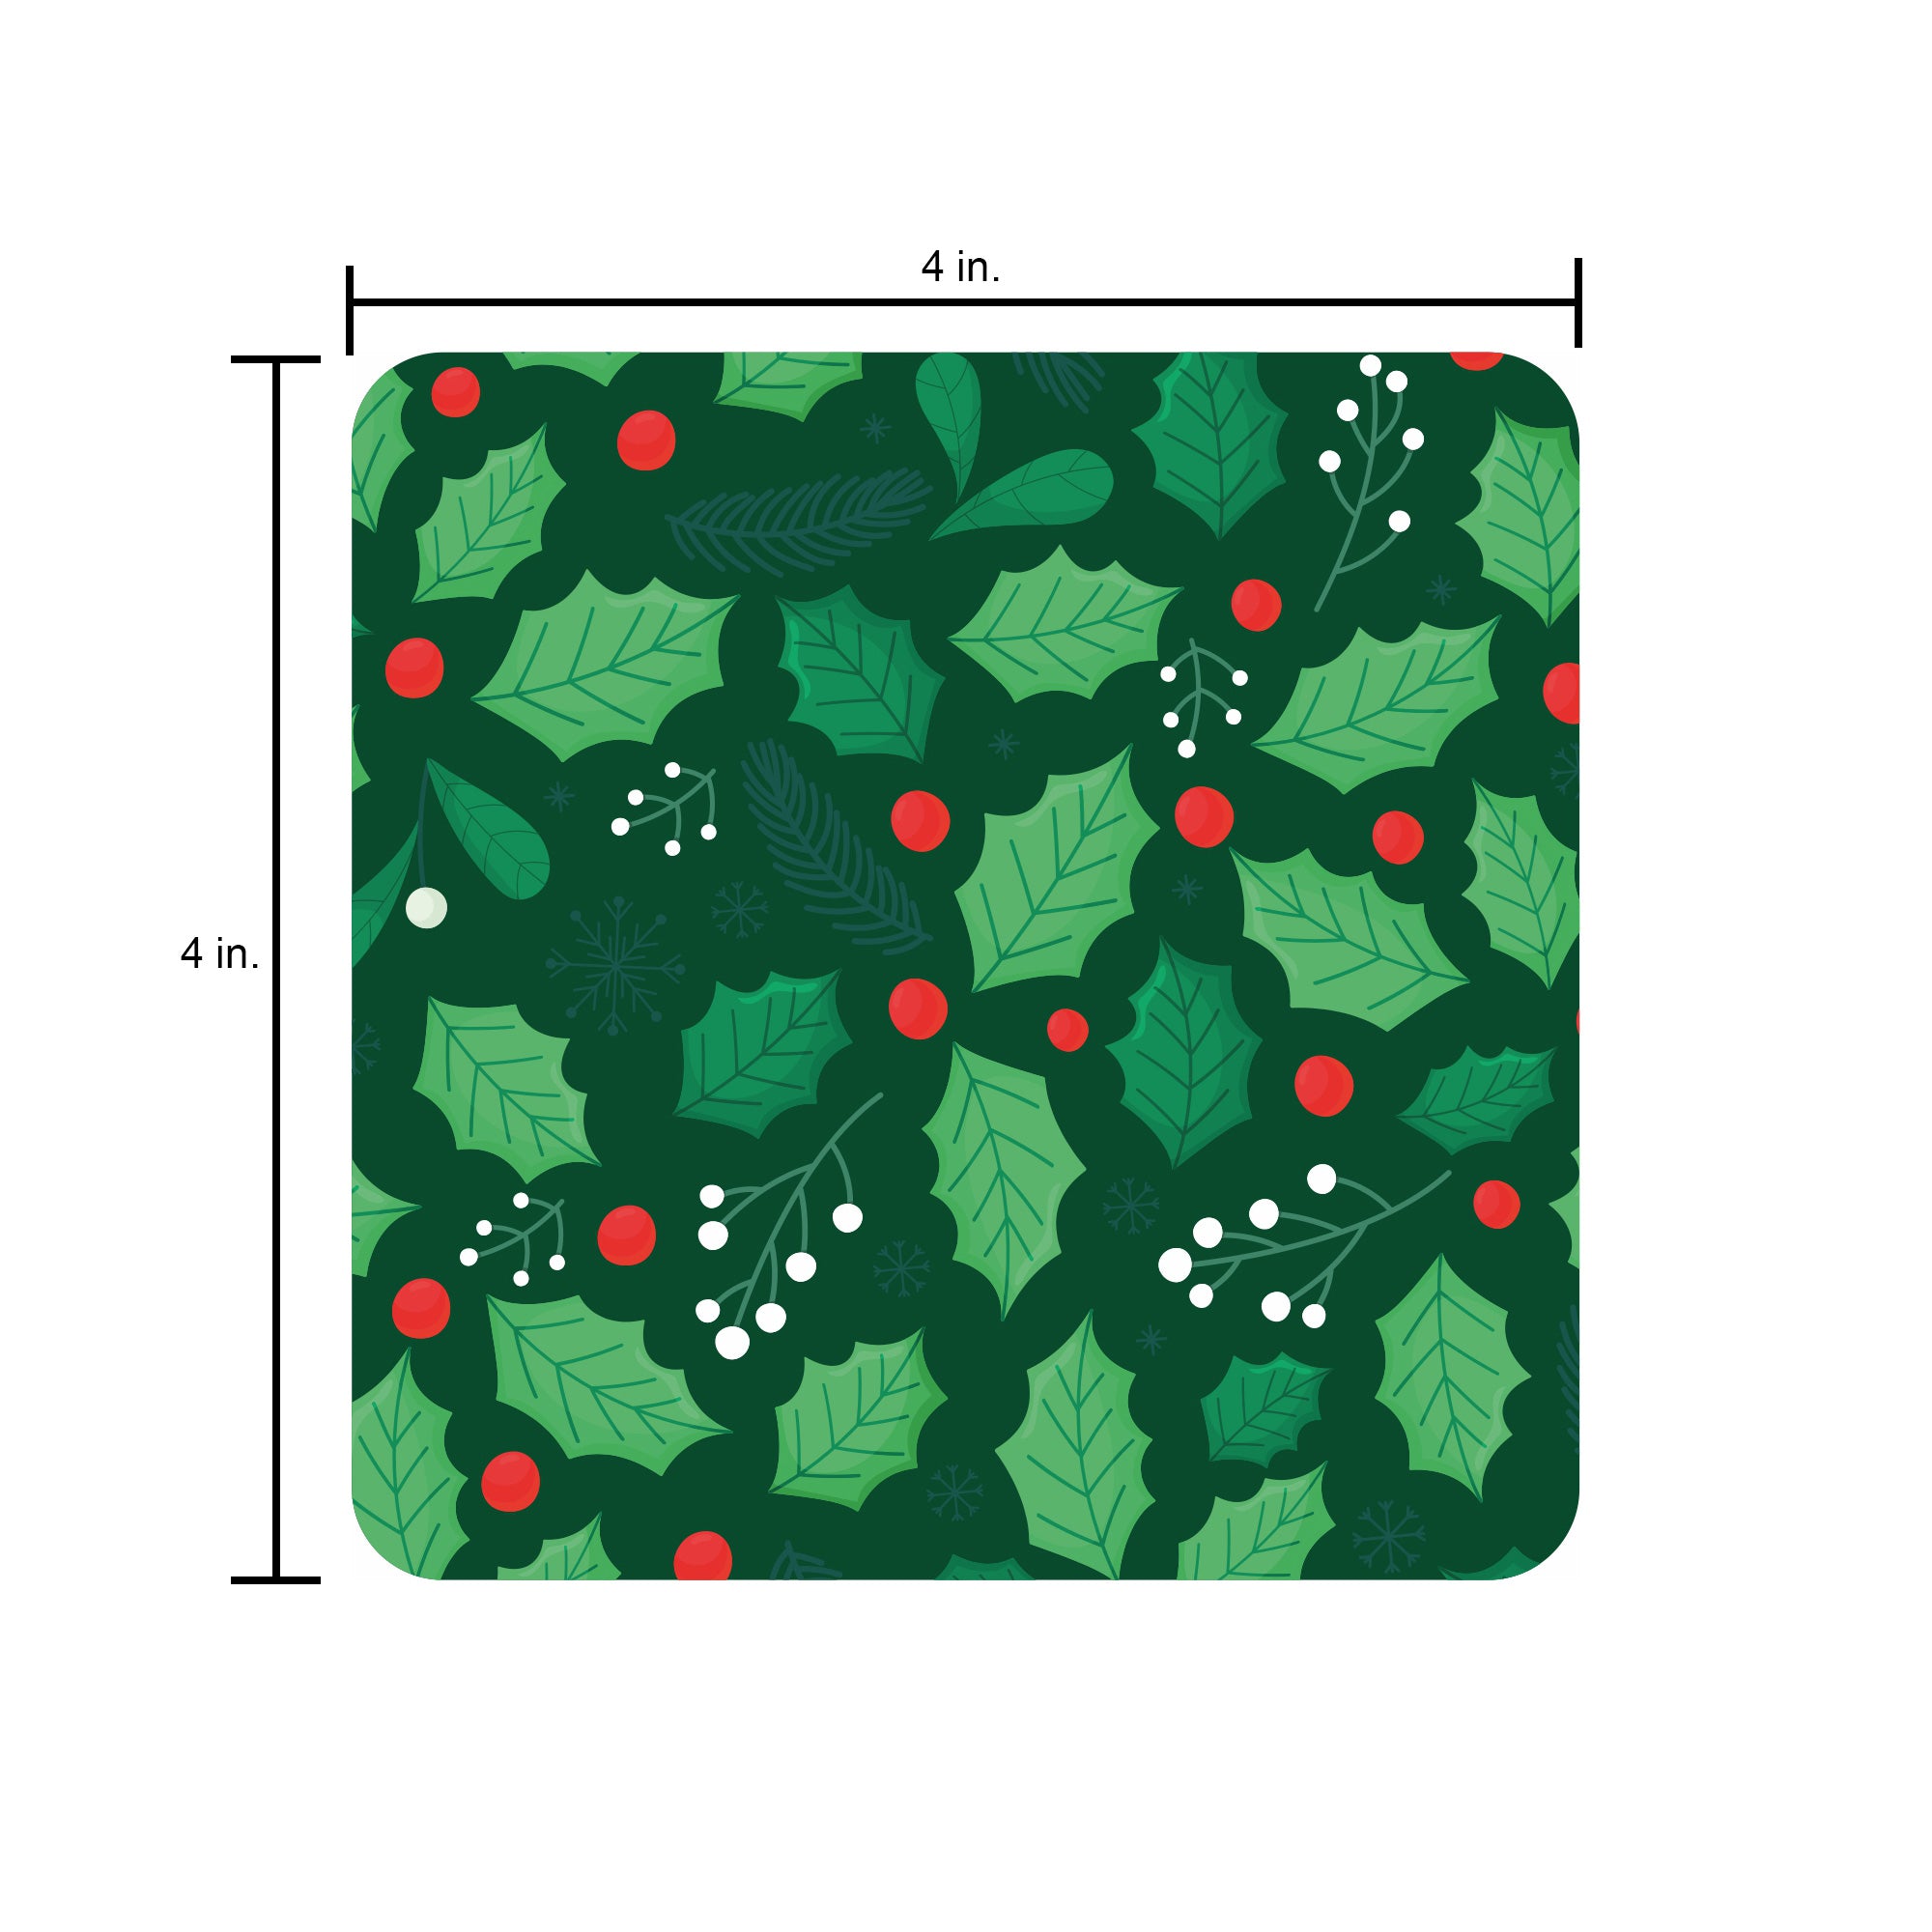 Foil Printed Christmas Placemat & Coaster Set - Holly Berries, W12 x H15 inches, W4 x H4 inches, 6pc each